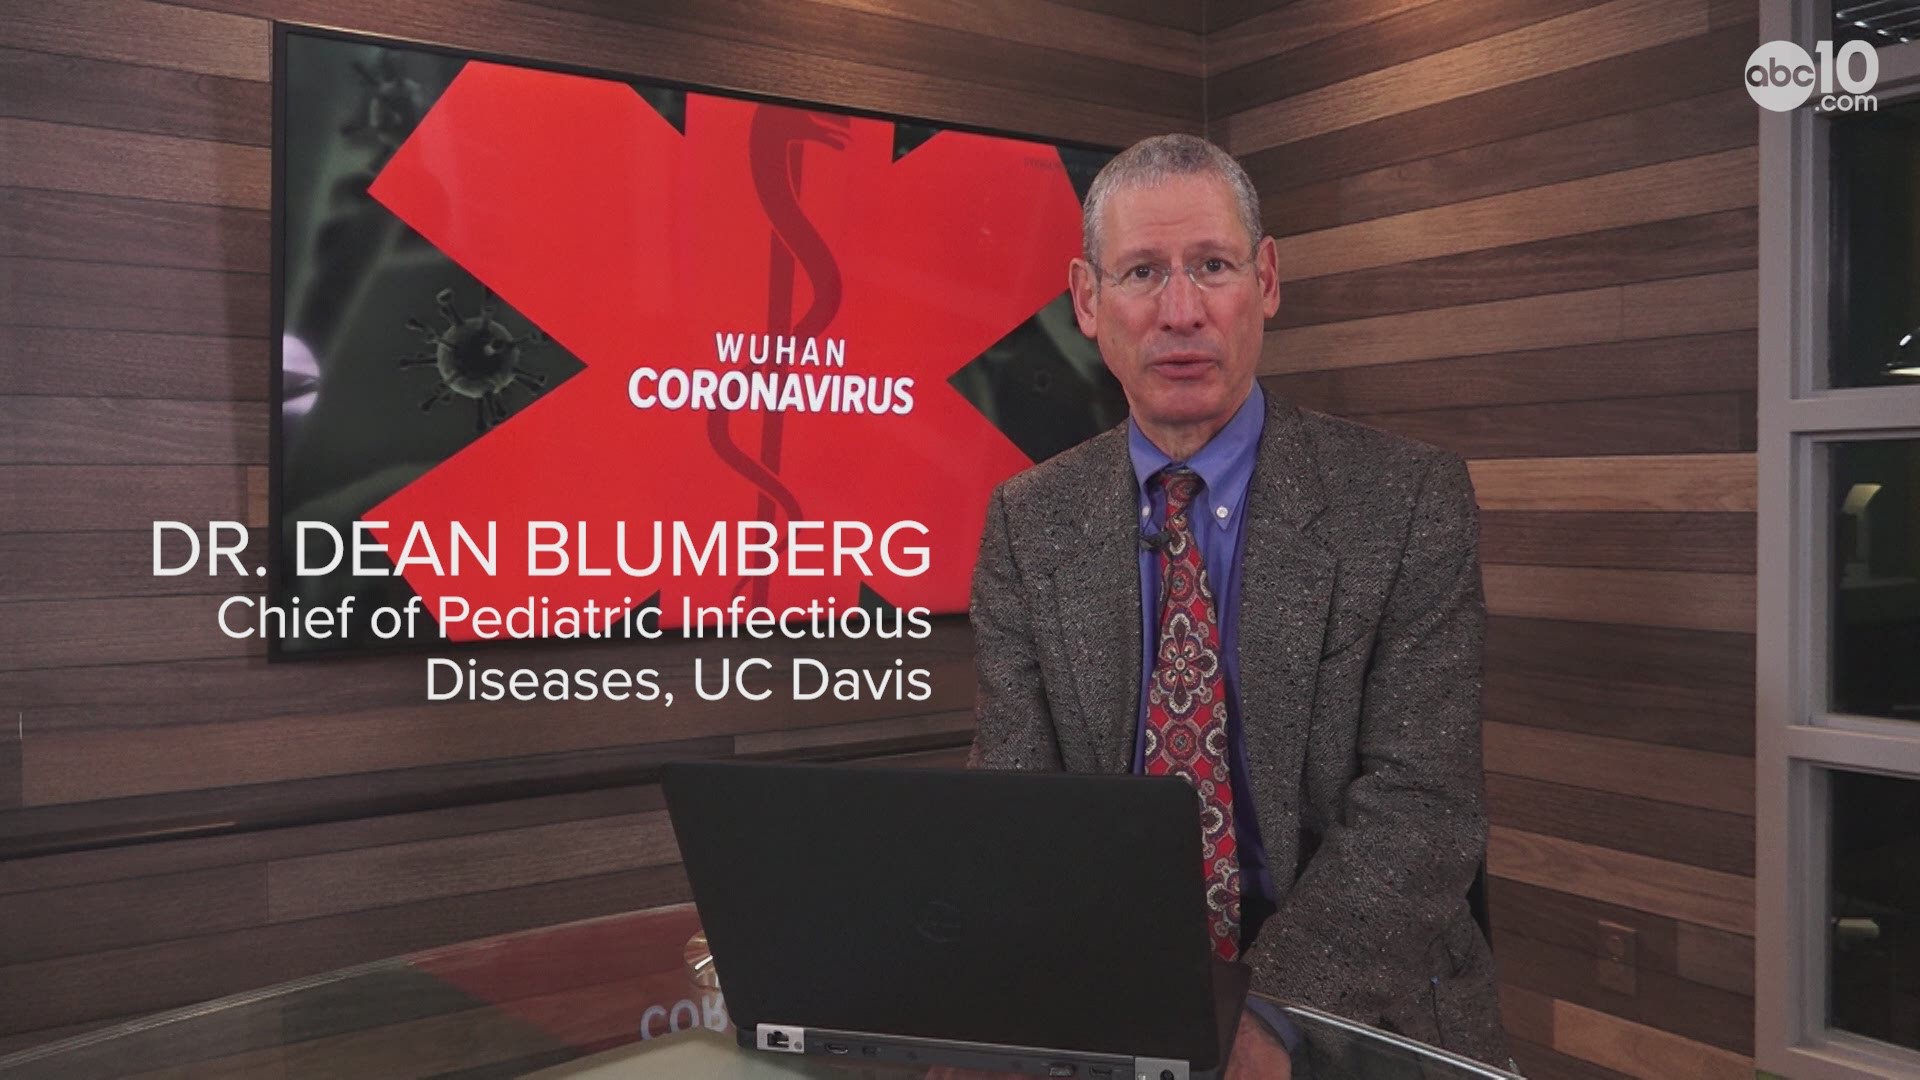 Dr. Dean Blumberg, the Chief of Pediatric Infectious Diseases at UC Davis, answered some FAQs from ABC10 viewers about the coronavirus on Feb. 6, 2020.